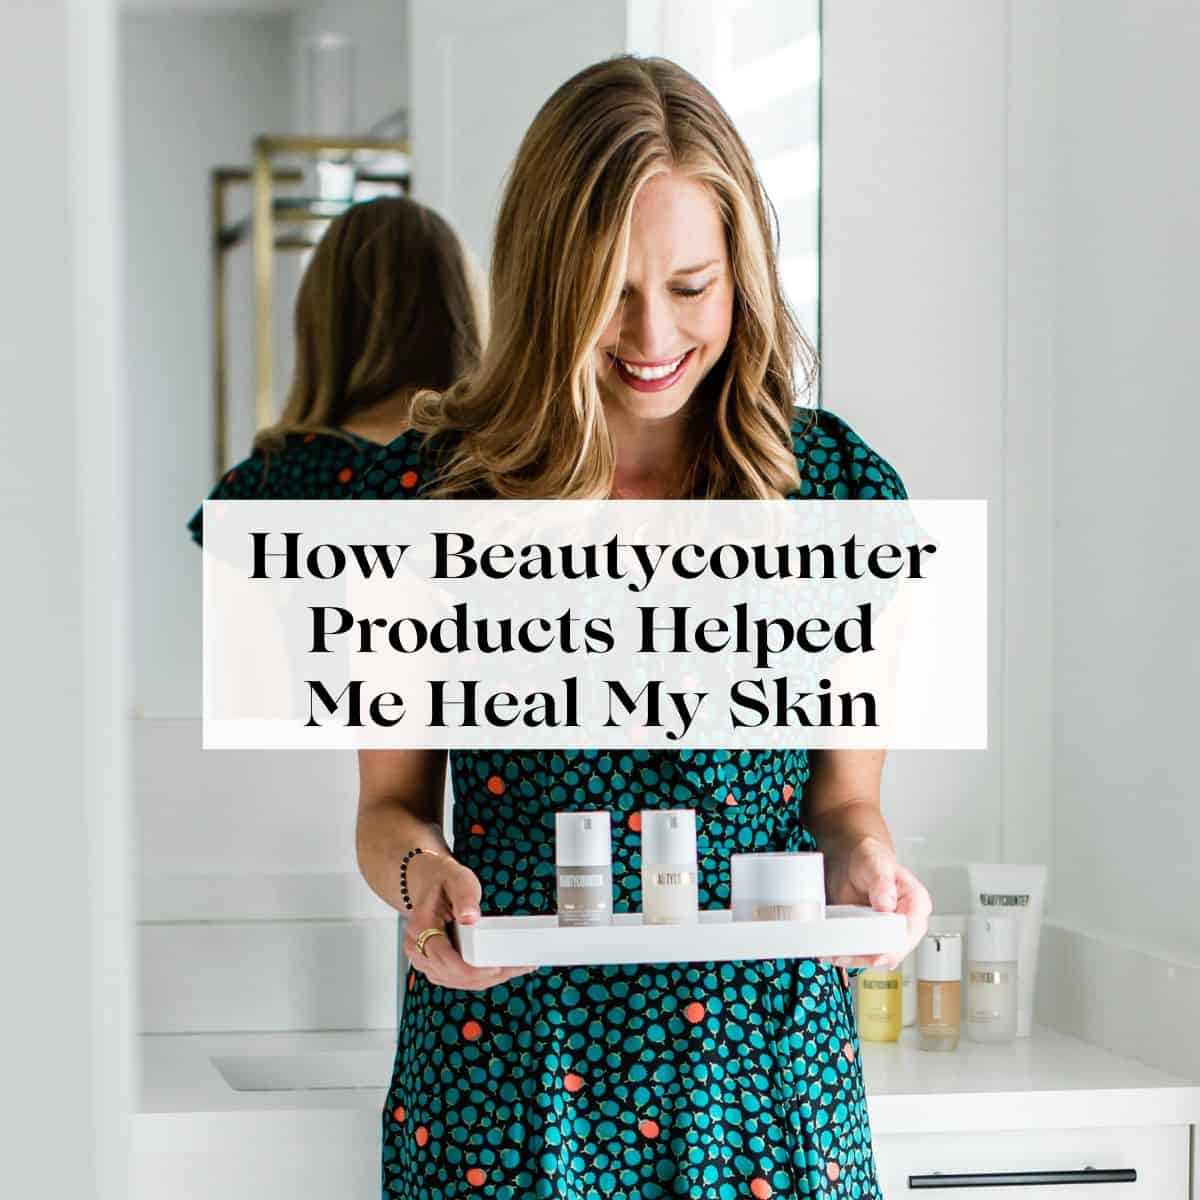 Erin Carter in her bathroom holding a tray with Beautycounter products on it with the title "How Beautycounter products helped me heal my skin" over her.